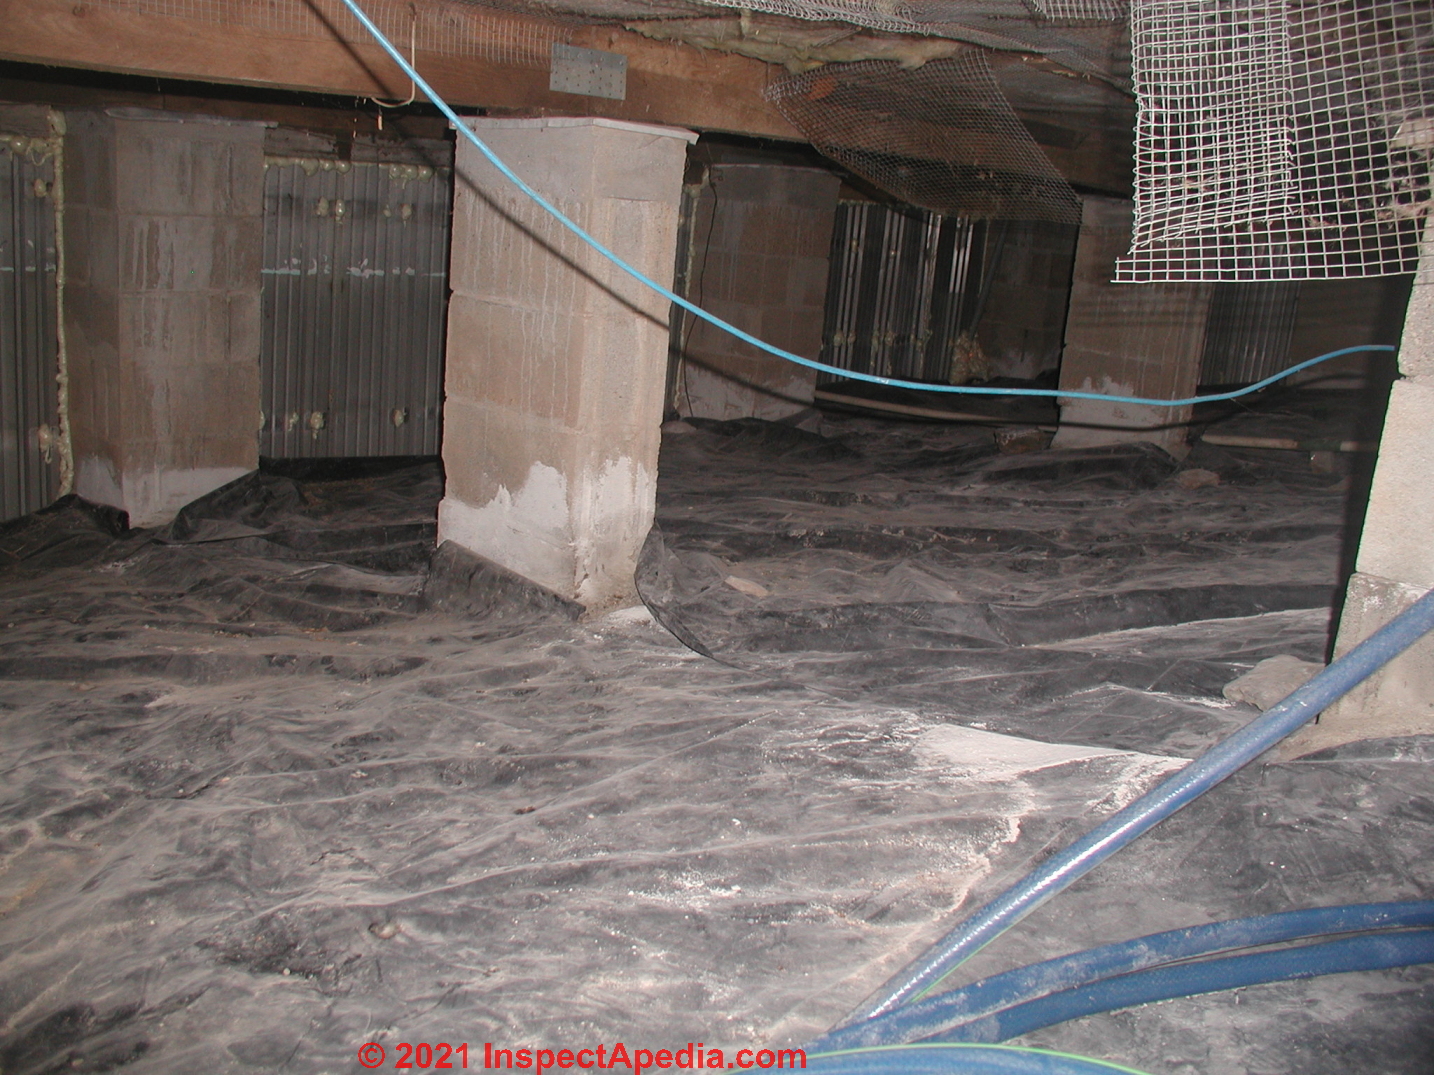 Dry Out a Crawl Space & Keep it Dry 10 steps to crawl area cleanup, dryout:  stop mold, insect damage, rot